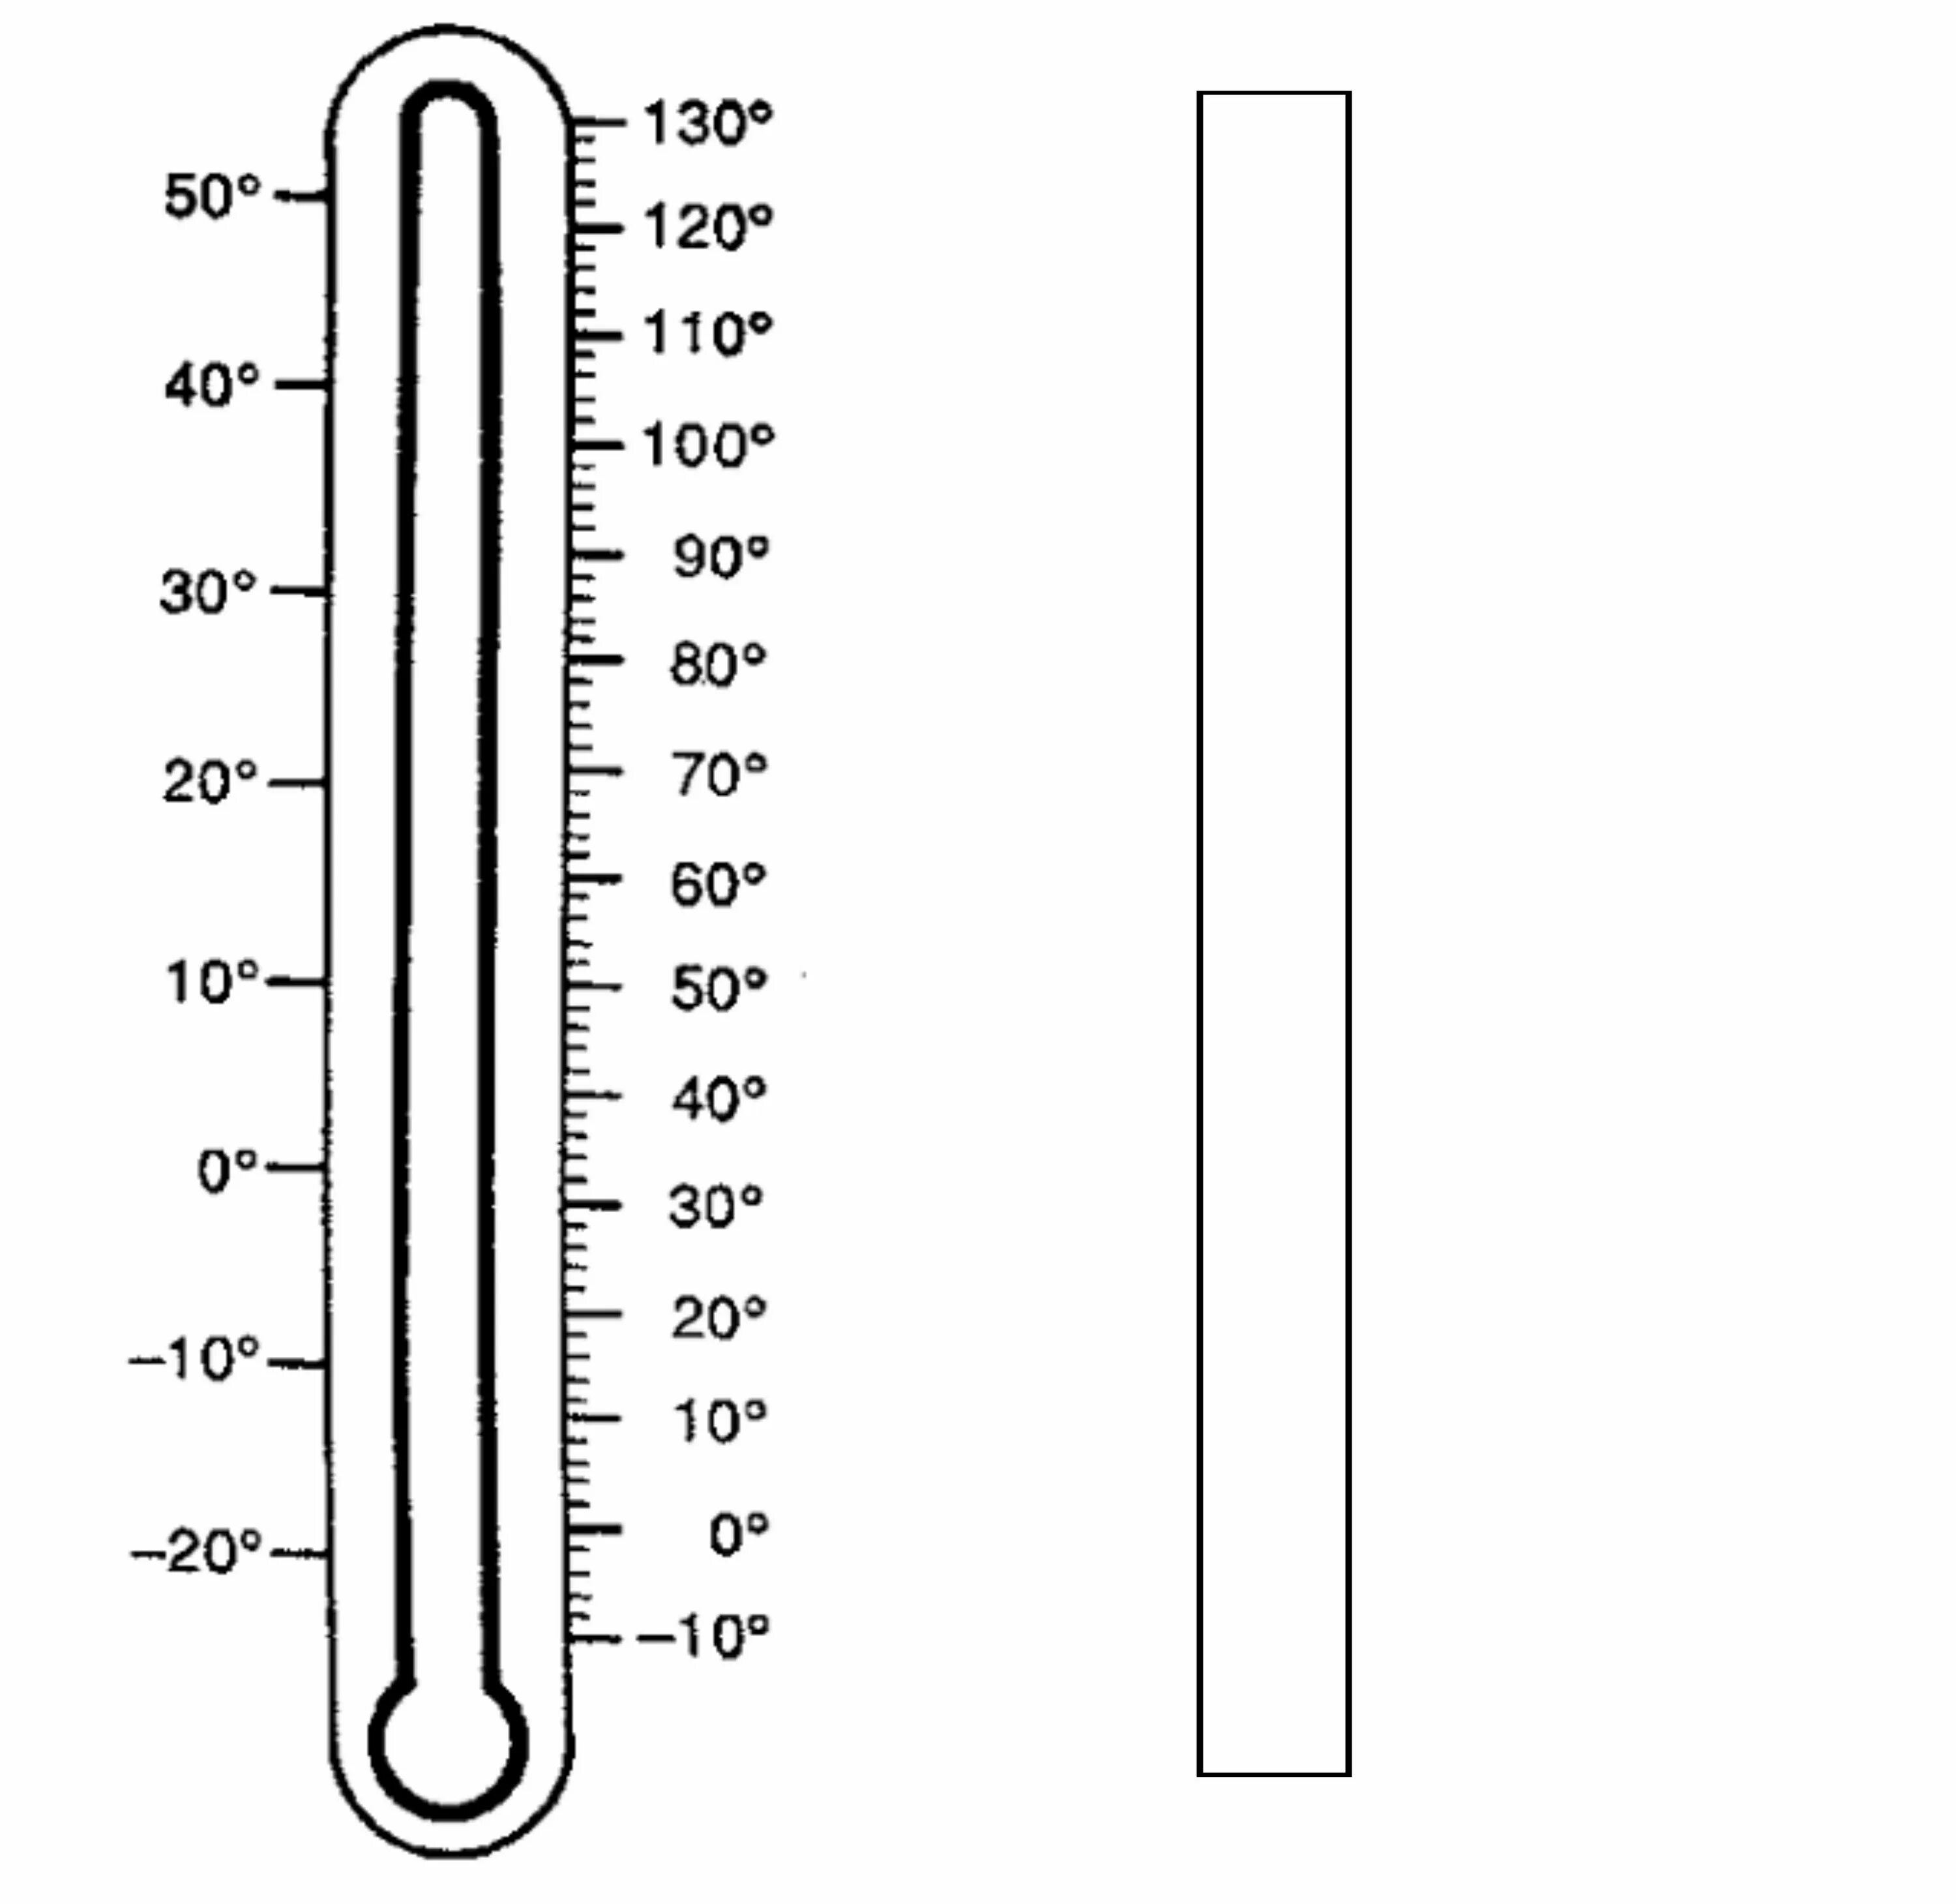 Colorful thermometer coloring book for kids of all abilities